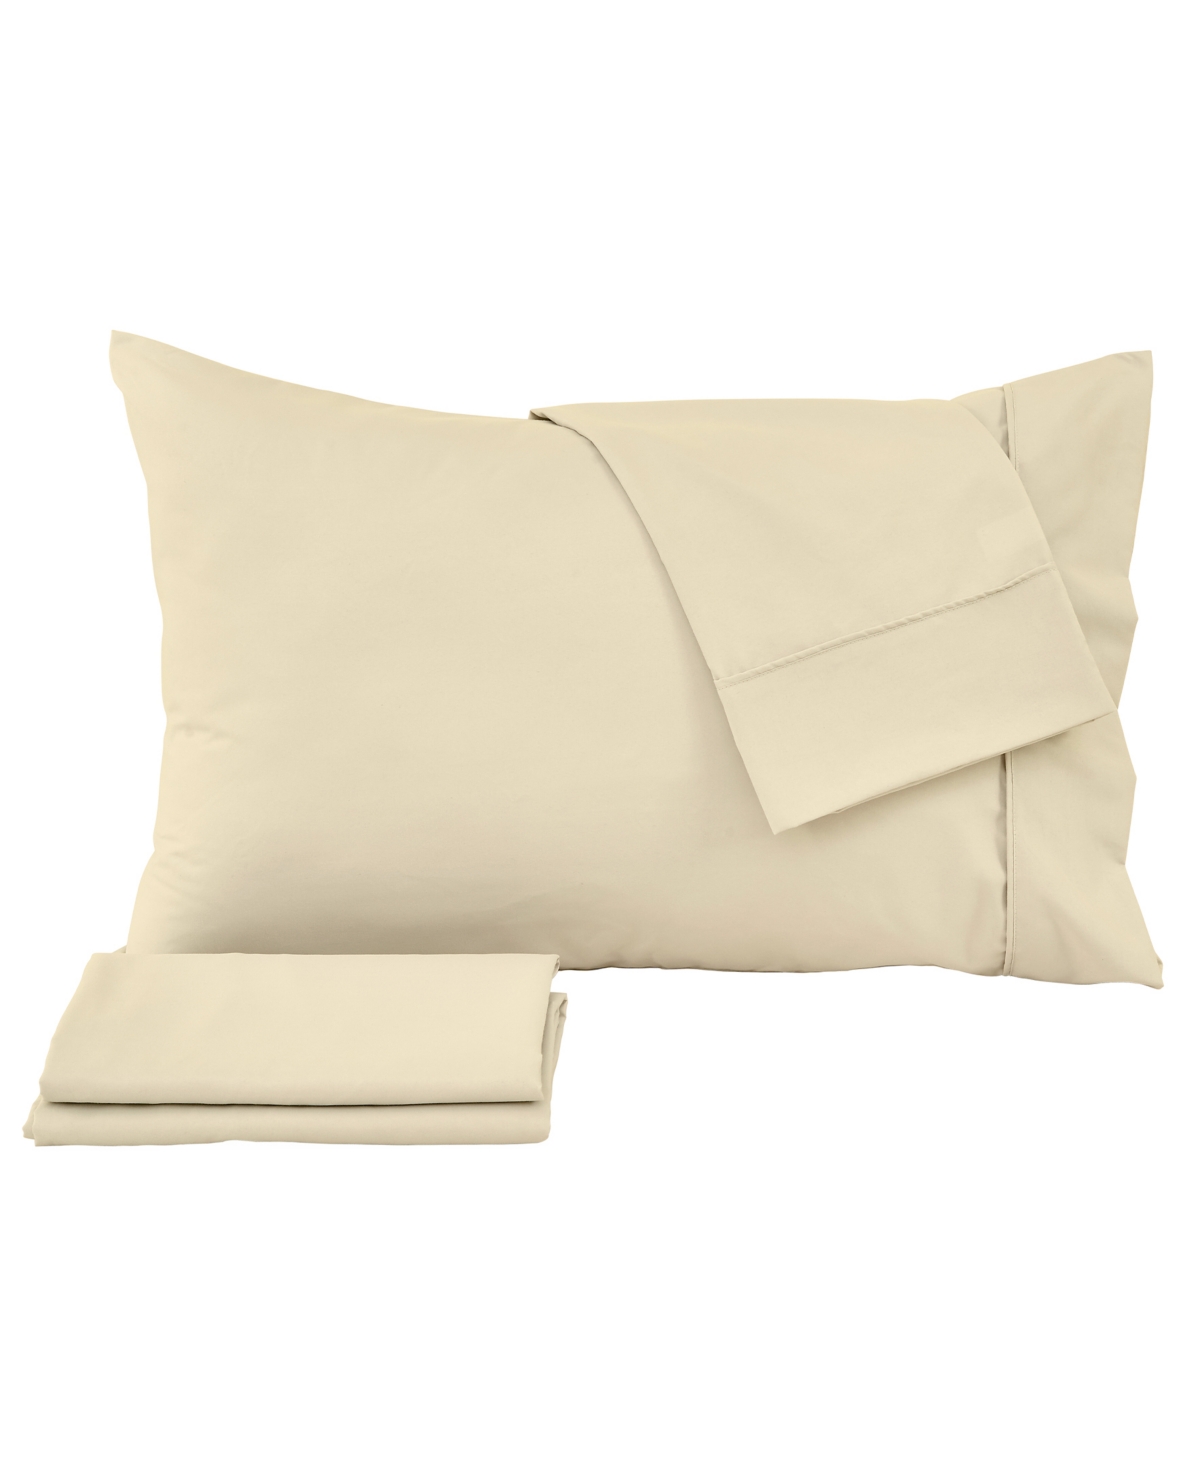 Premium Comforts Solid Microfiber Ultra Soft 3 Piece Sheet Set, Twin In Natural